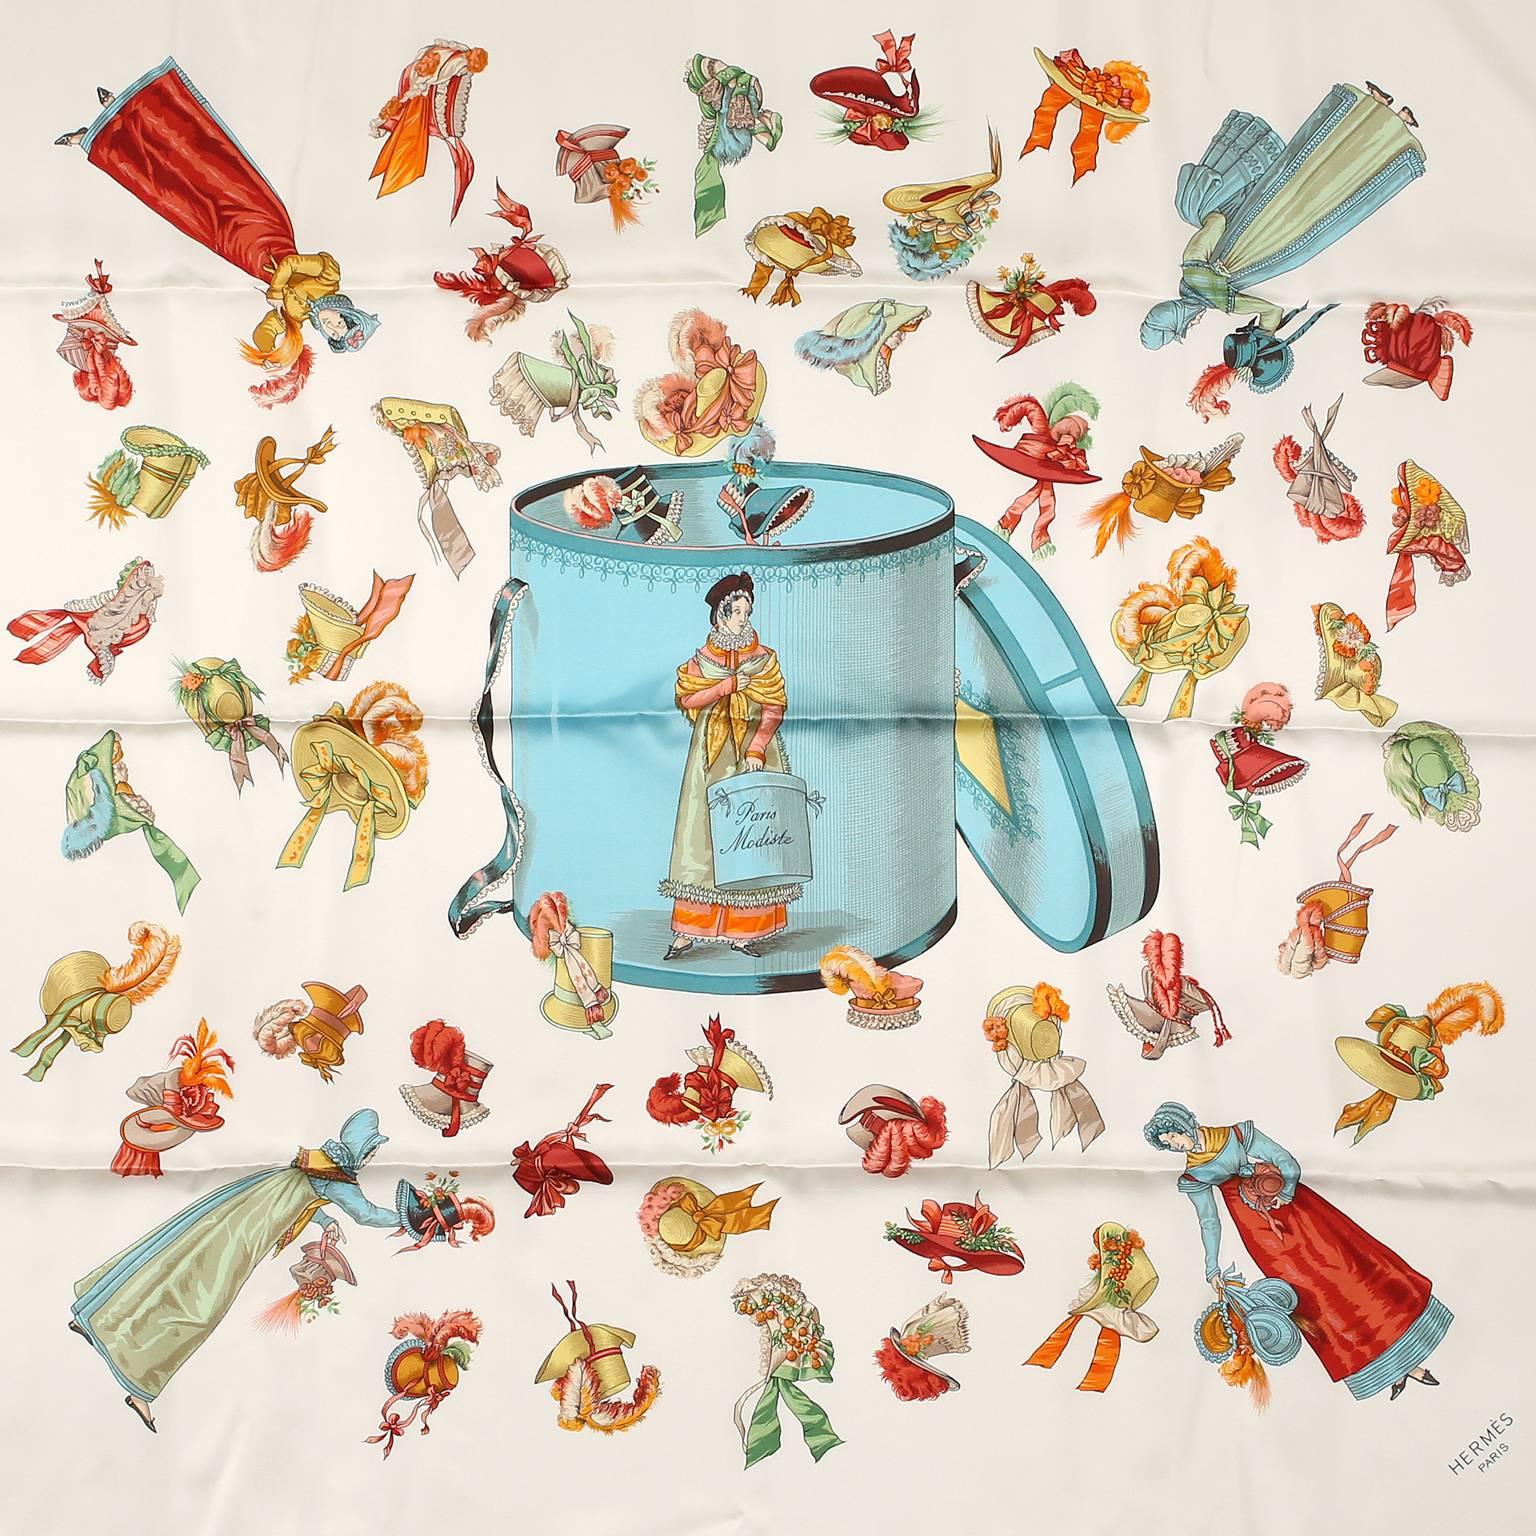 Hermès Paris Modiste 90 cm Silk Scarf - PRISTINE
  Designed by Hugo Grygkar and first issued in 1956, it is considered highly collectible.
White background with a robin’s egg blue hat box as the centerpiece.  “Modiste” translates to milliner, or hat